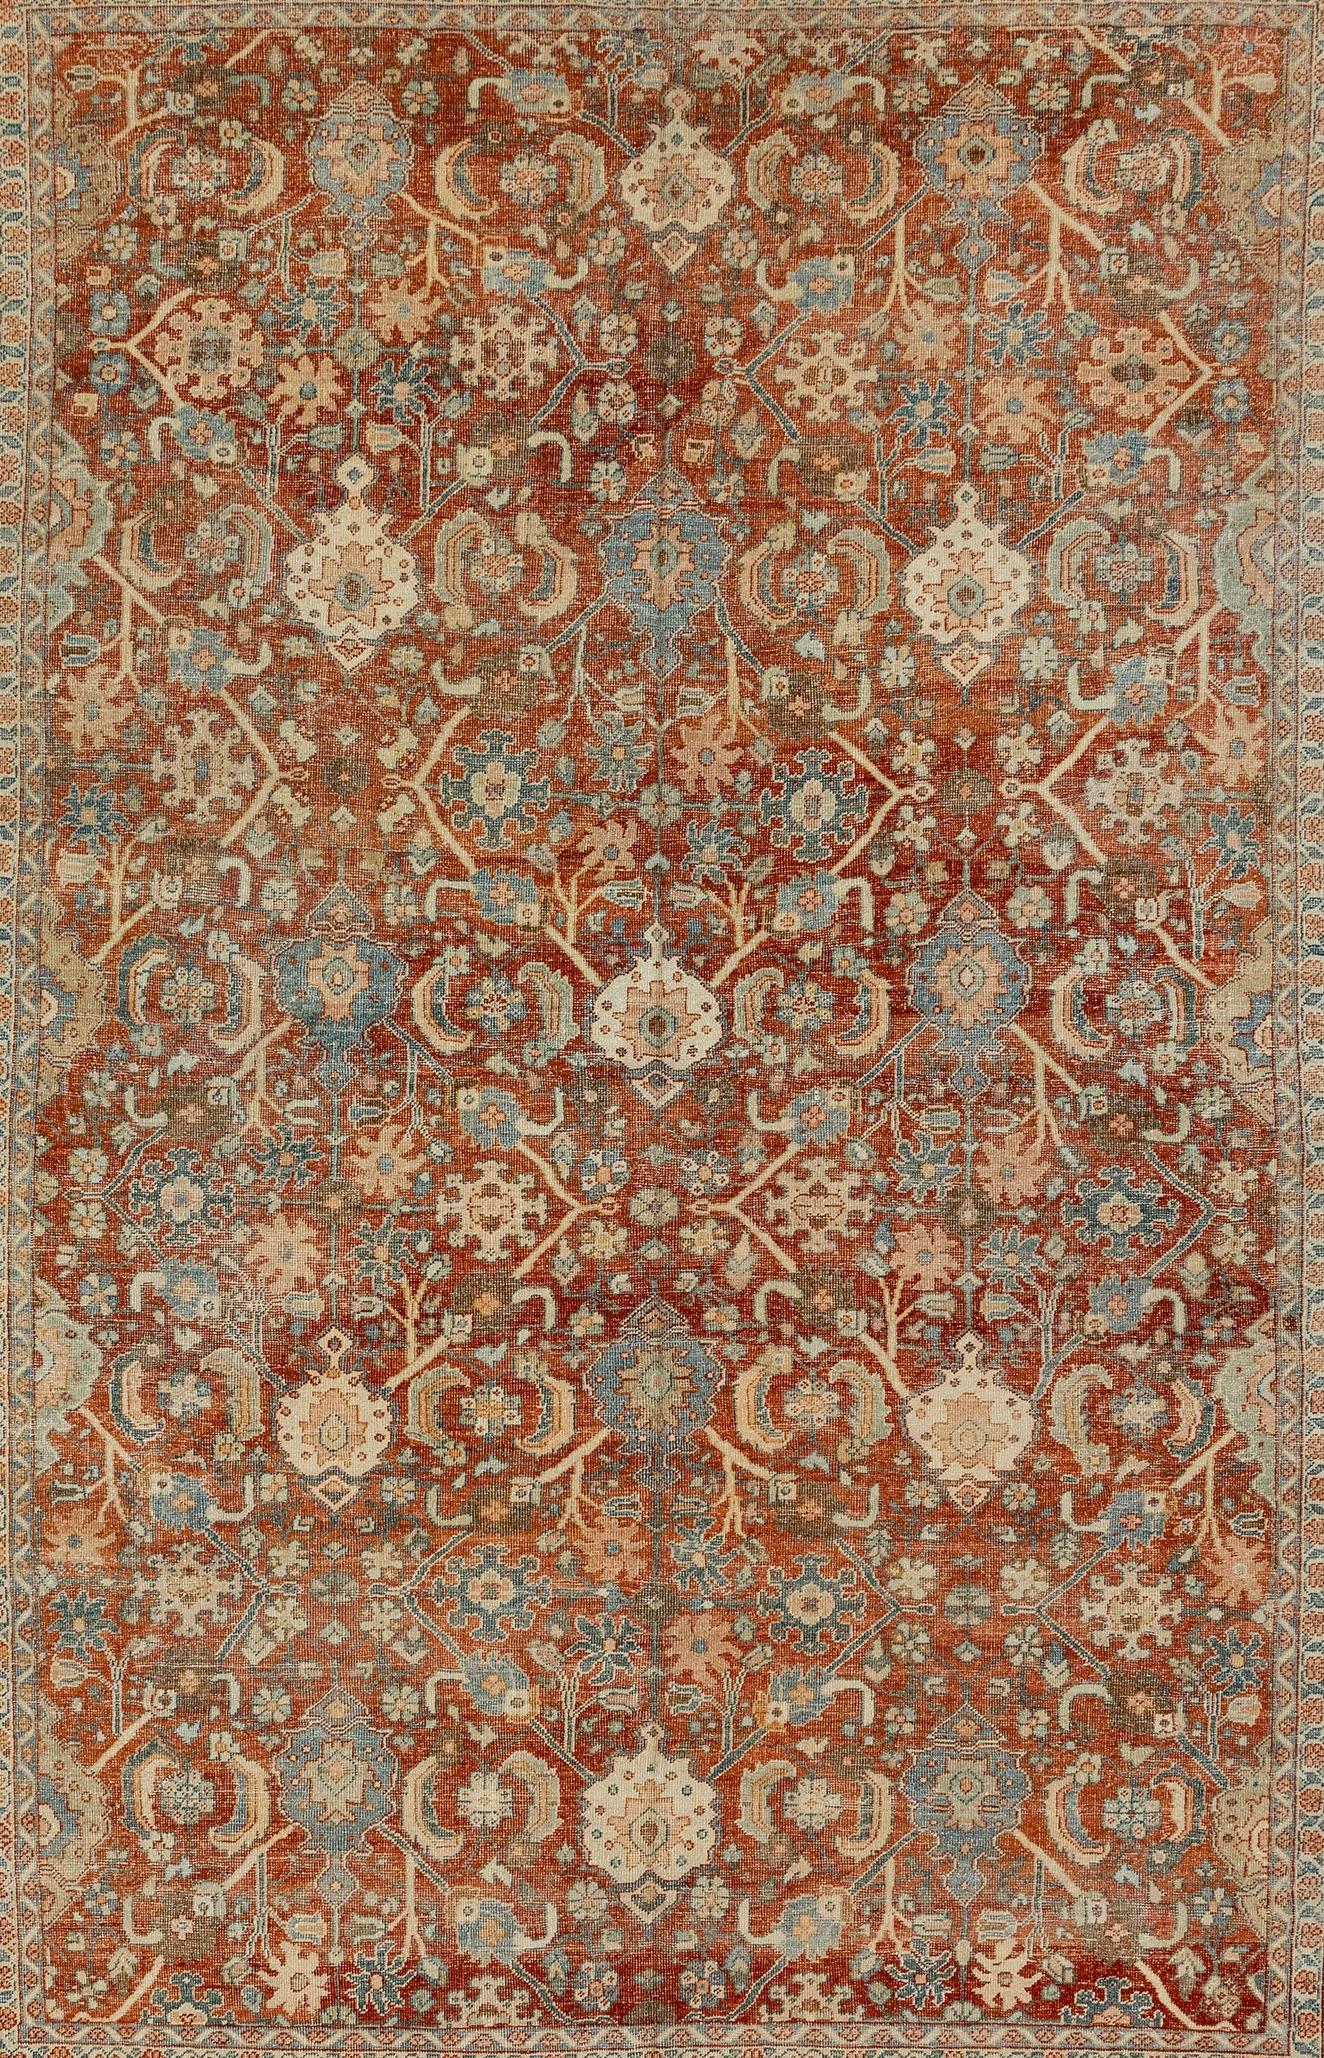 This rug is a Sultanabad originating from the city Sultanabad which is now Arak. These rugs played a significant role in the development of traditions and decorative arts in this region. 

This Sultanabad can be distinguished by very unique